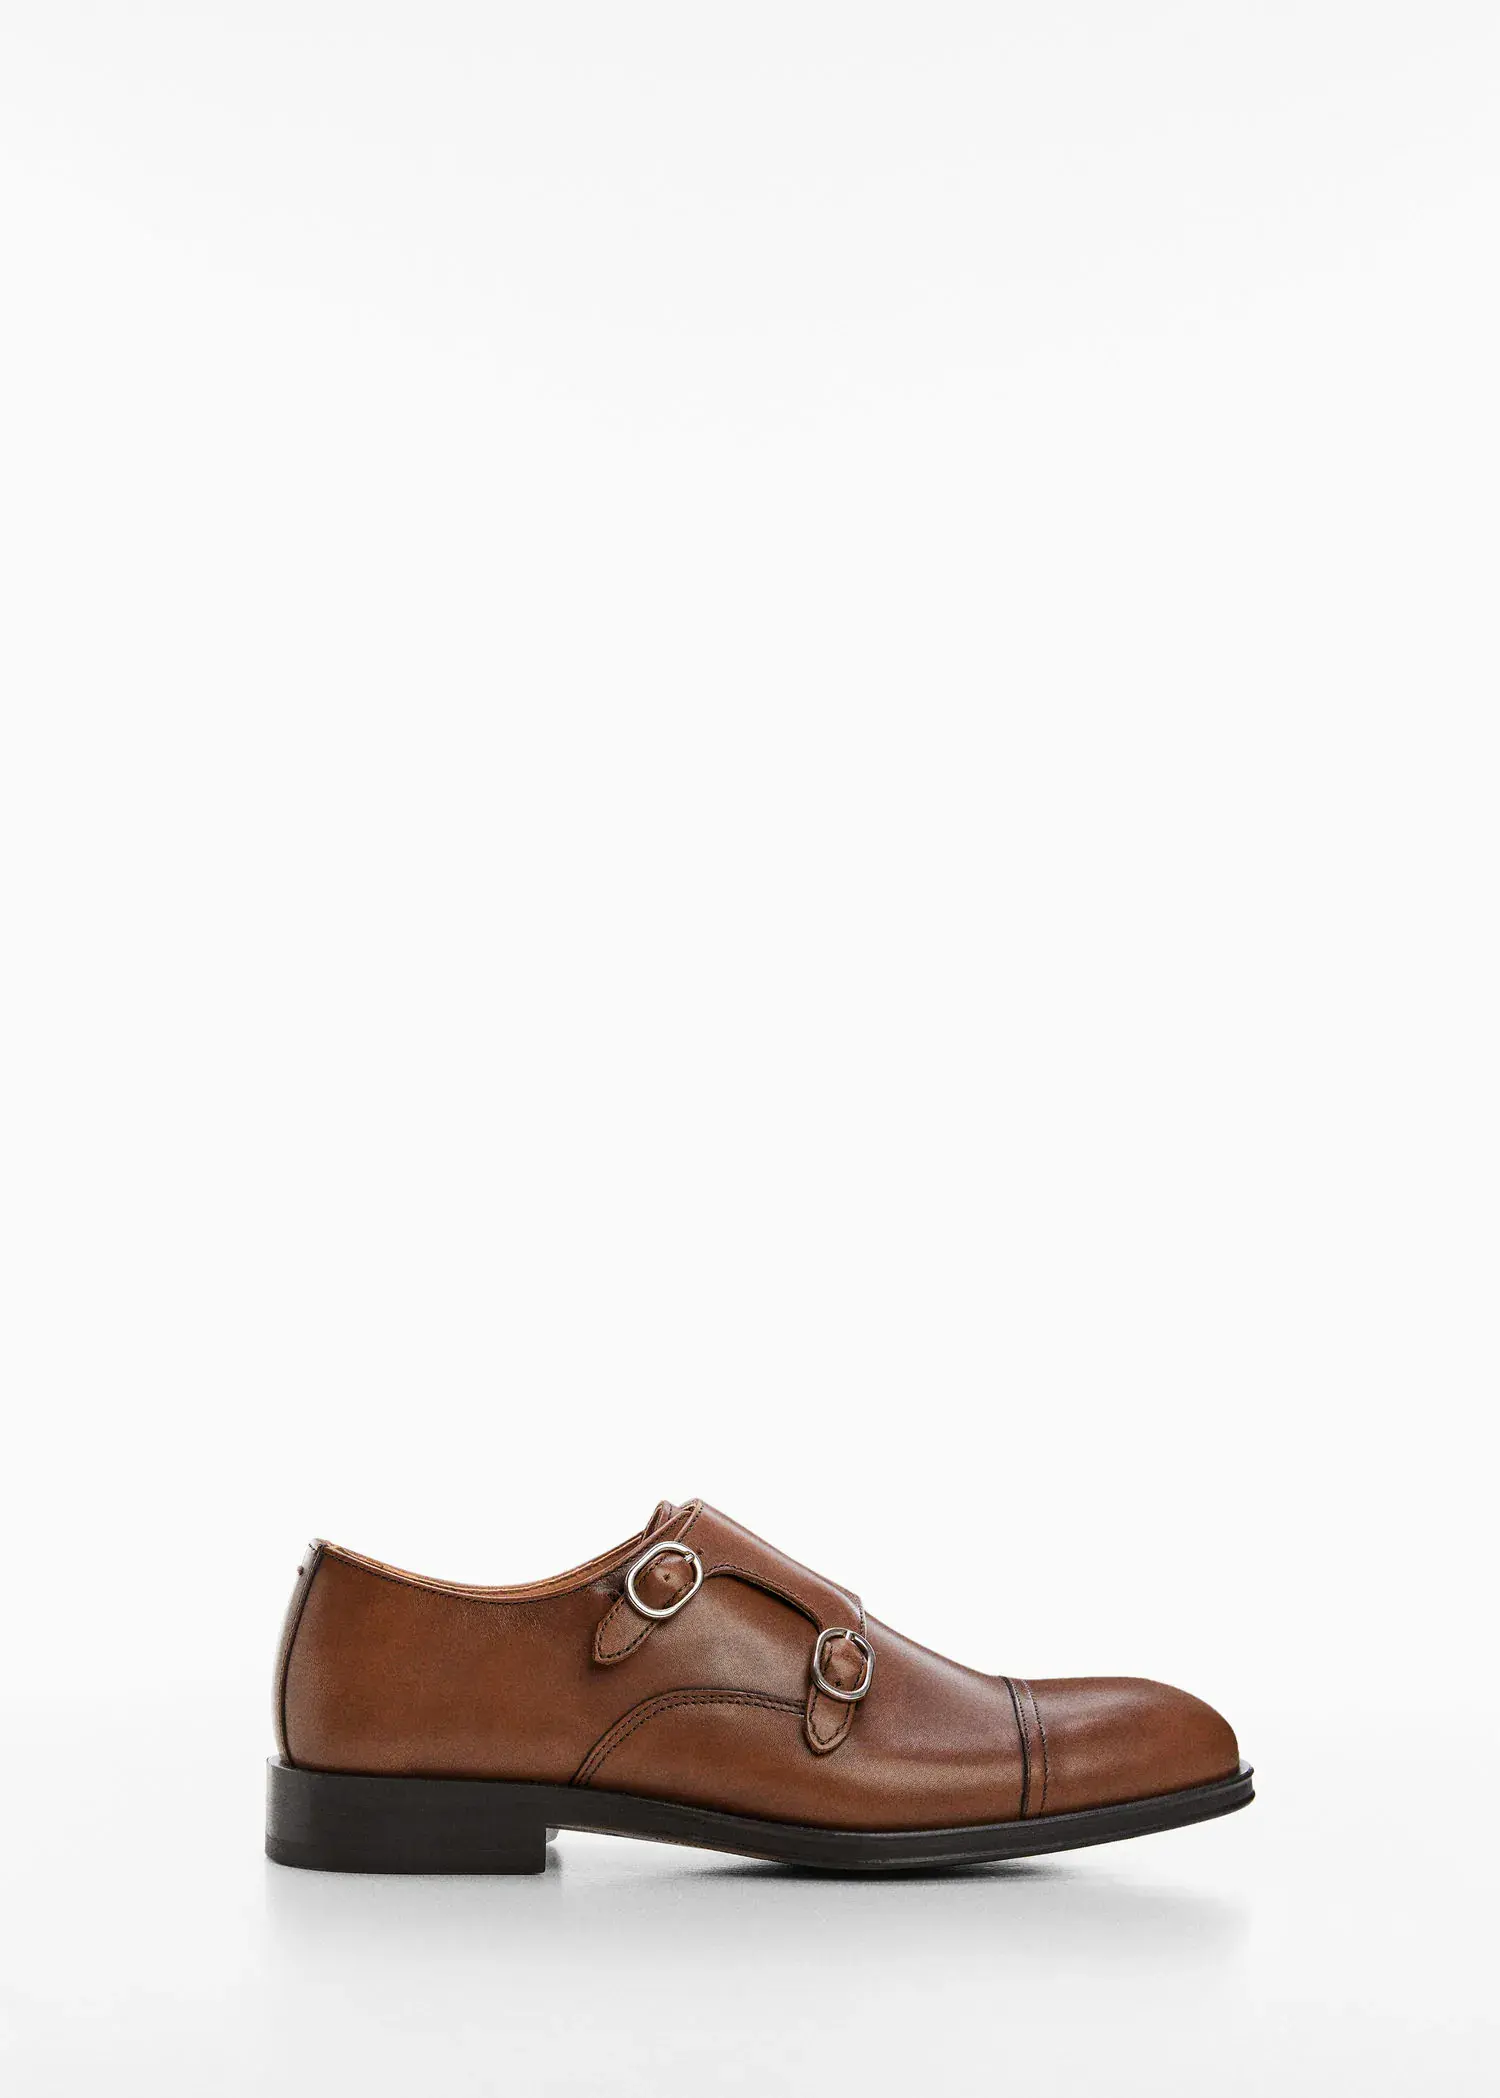 Mango Monk shoes with leather buckle. a pair of brown shoes on a white background. 